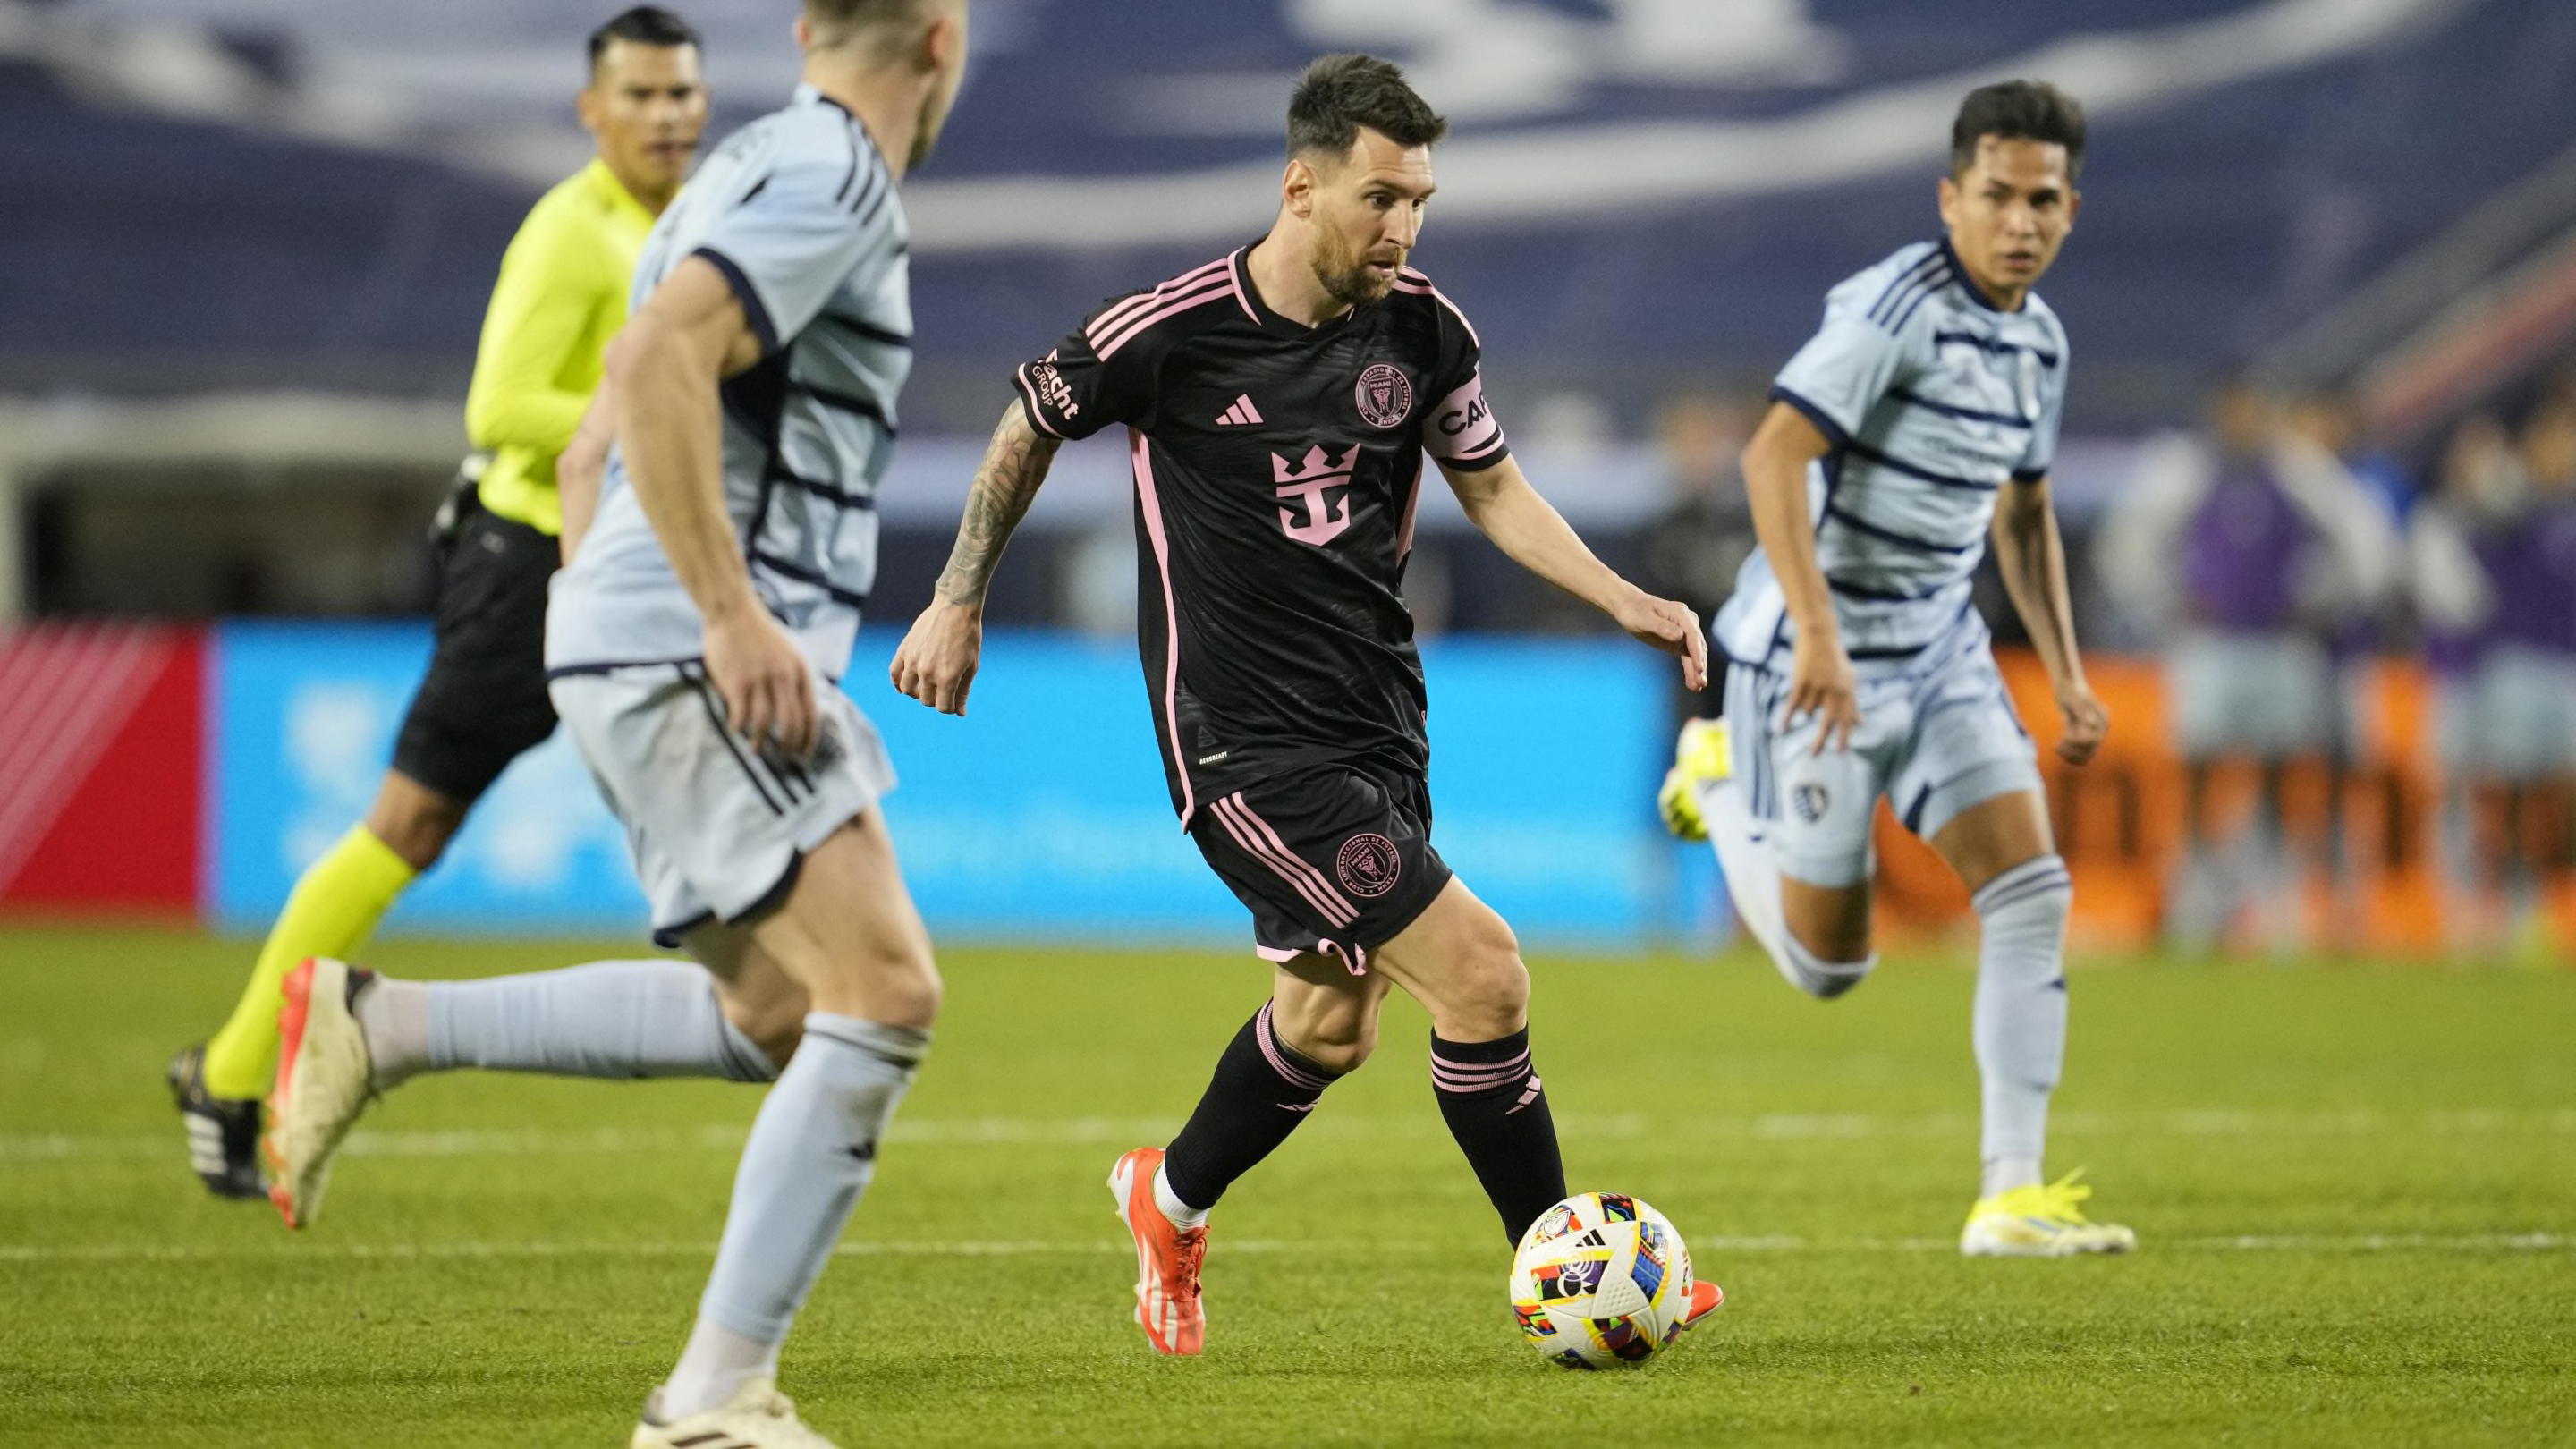 Peter Vermes praises Lionel Messi in Sporting KC's narrow defeat to Inter Miami